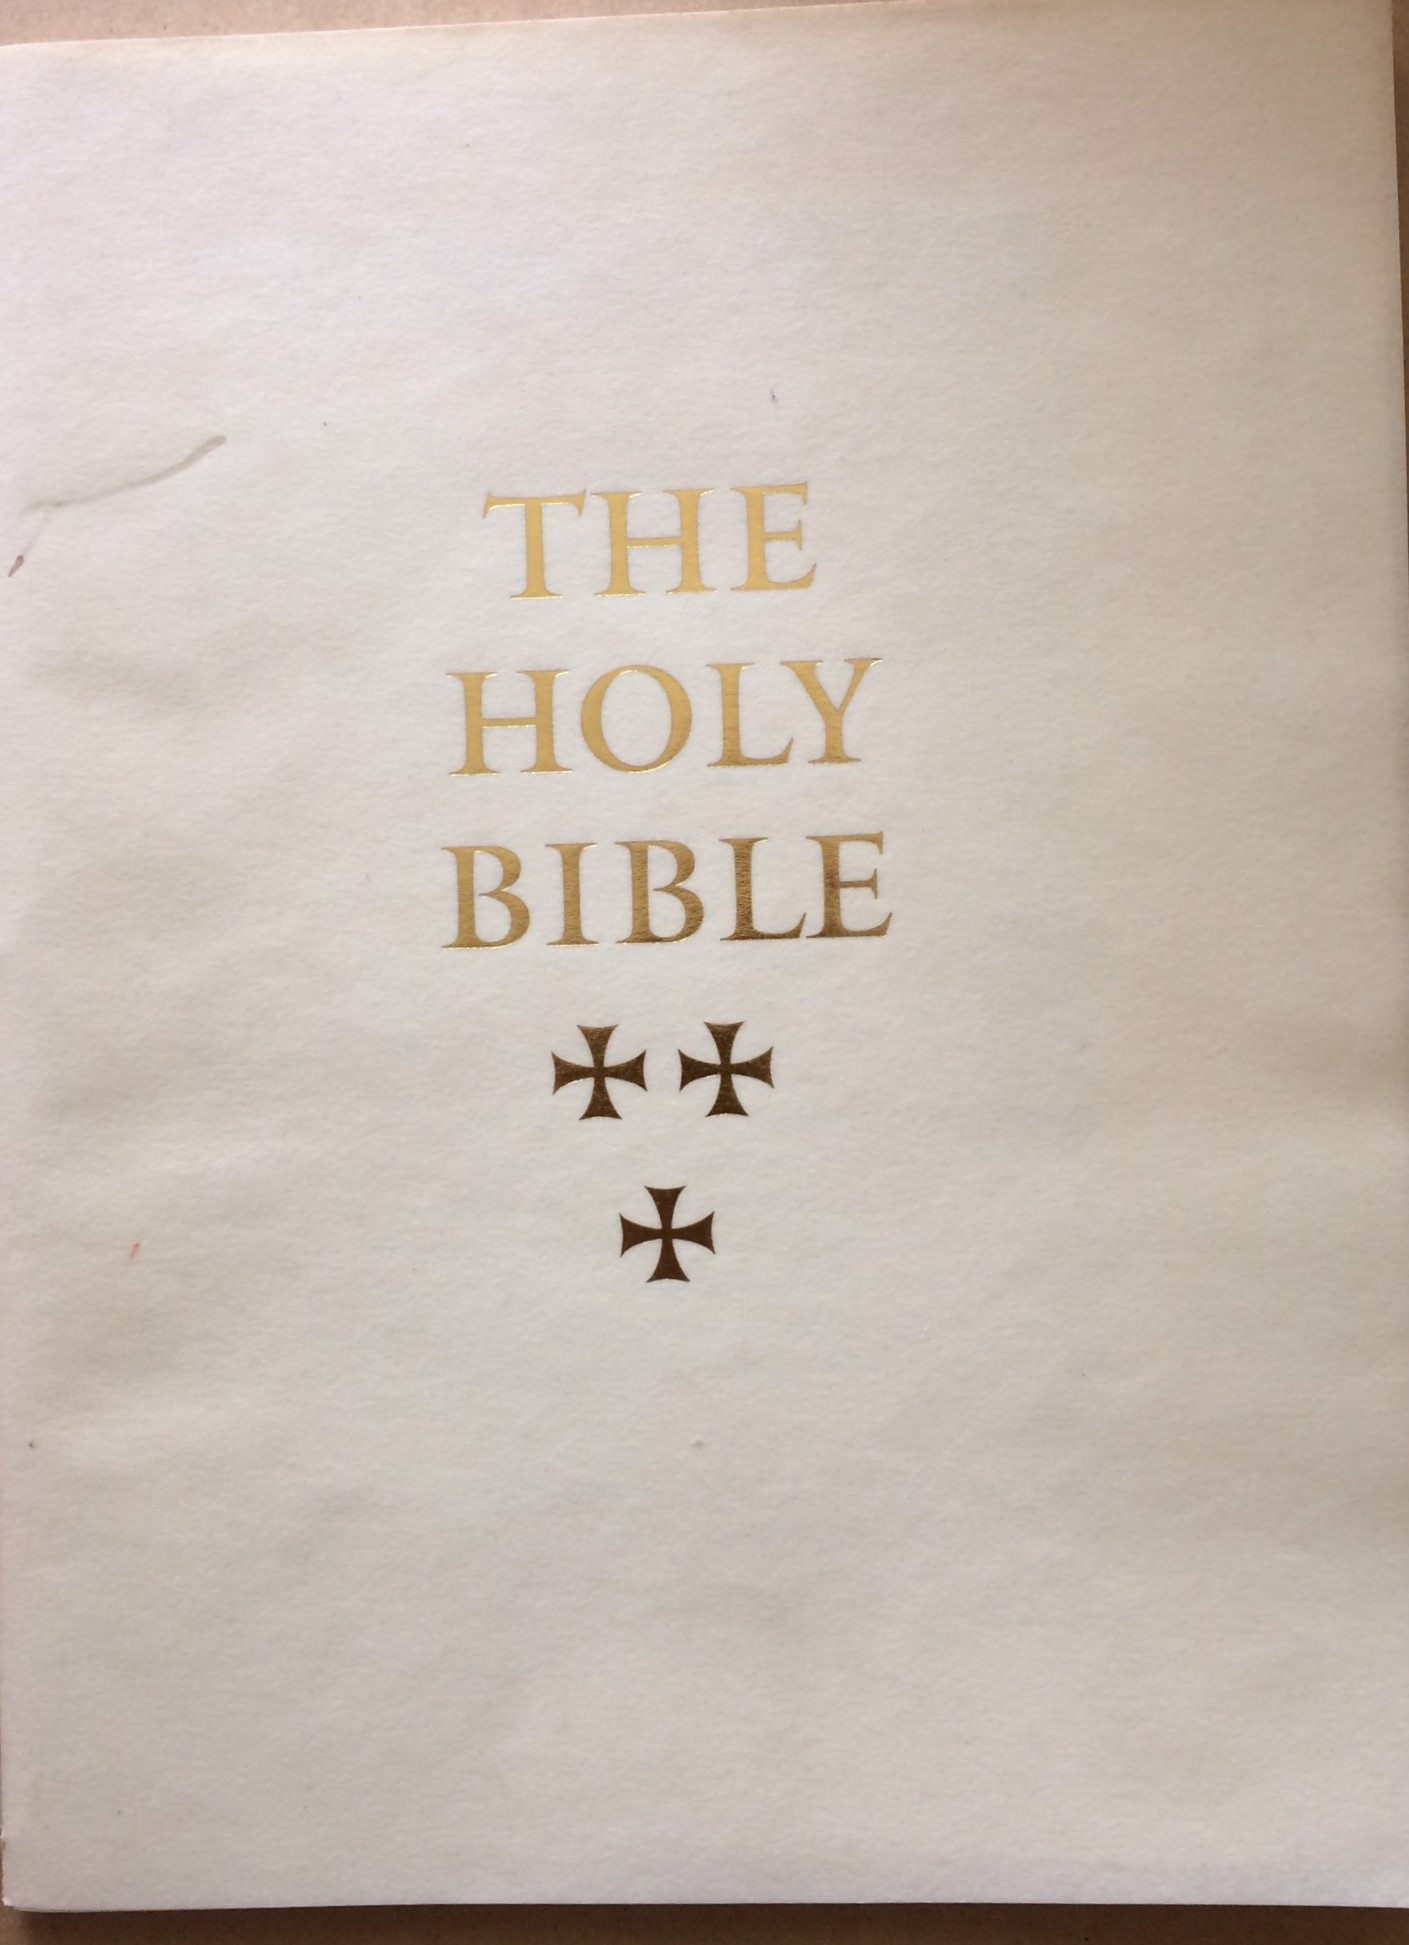 Image for The Holy Bible, An Illustrated Folio Edition of The King James Bible to be Published in 1999 (Prospectus)